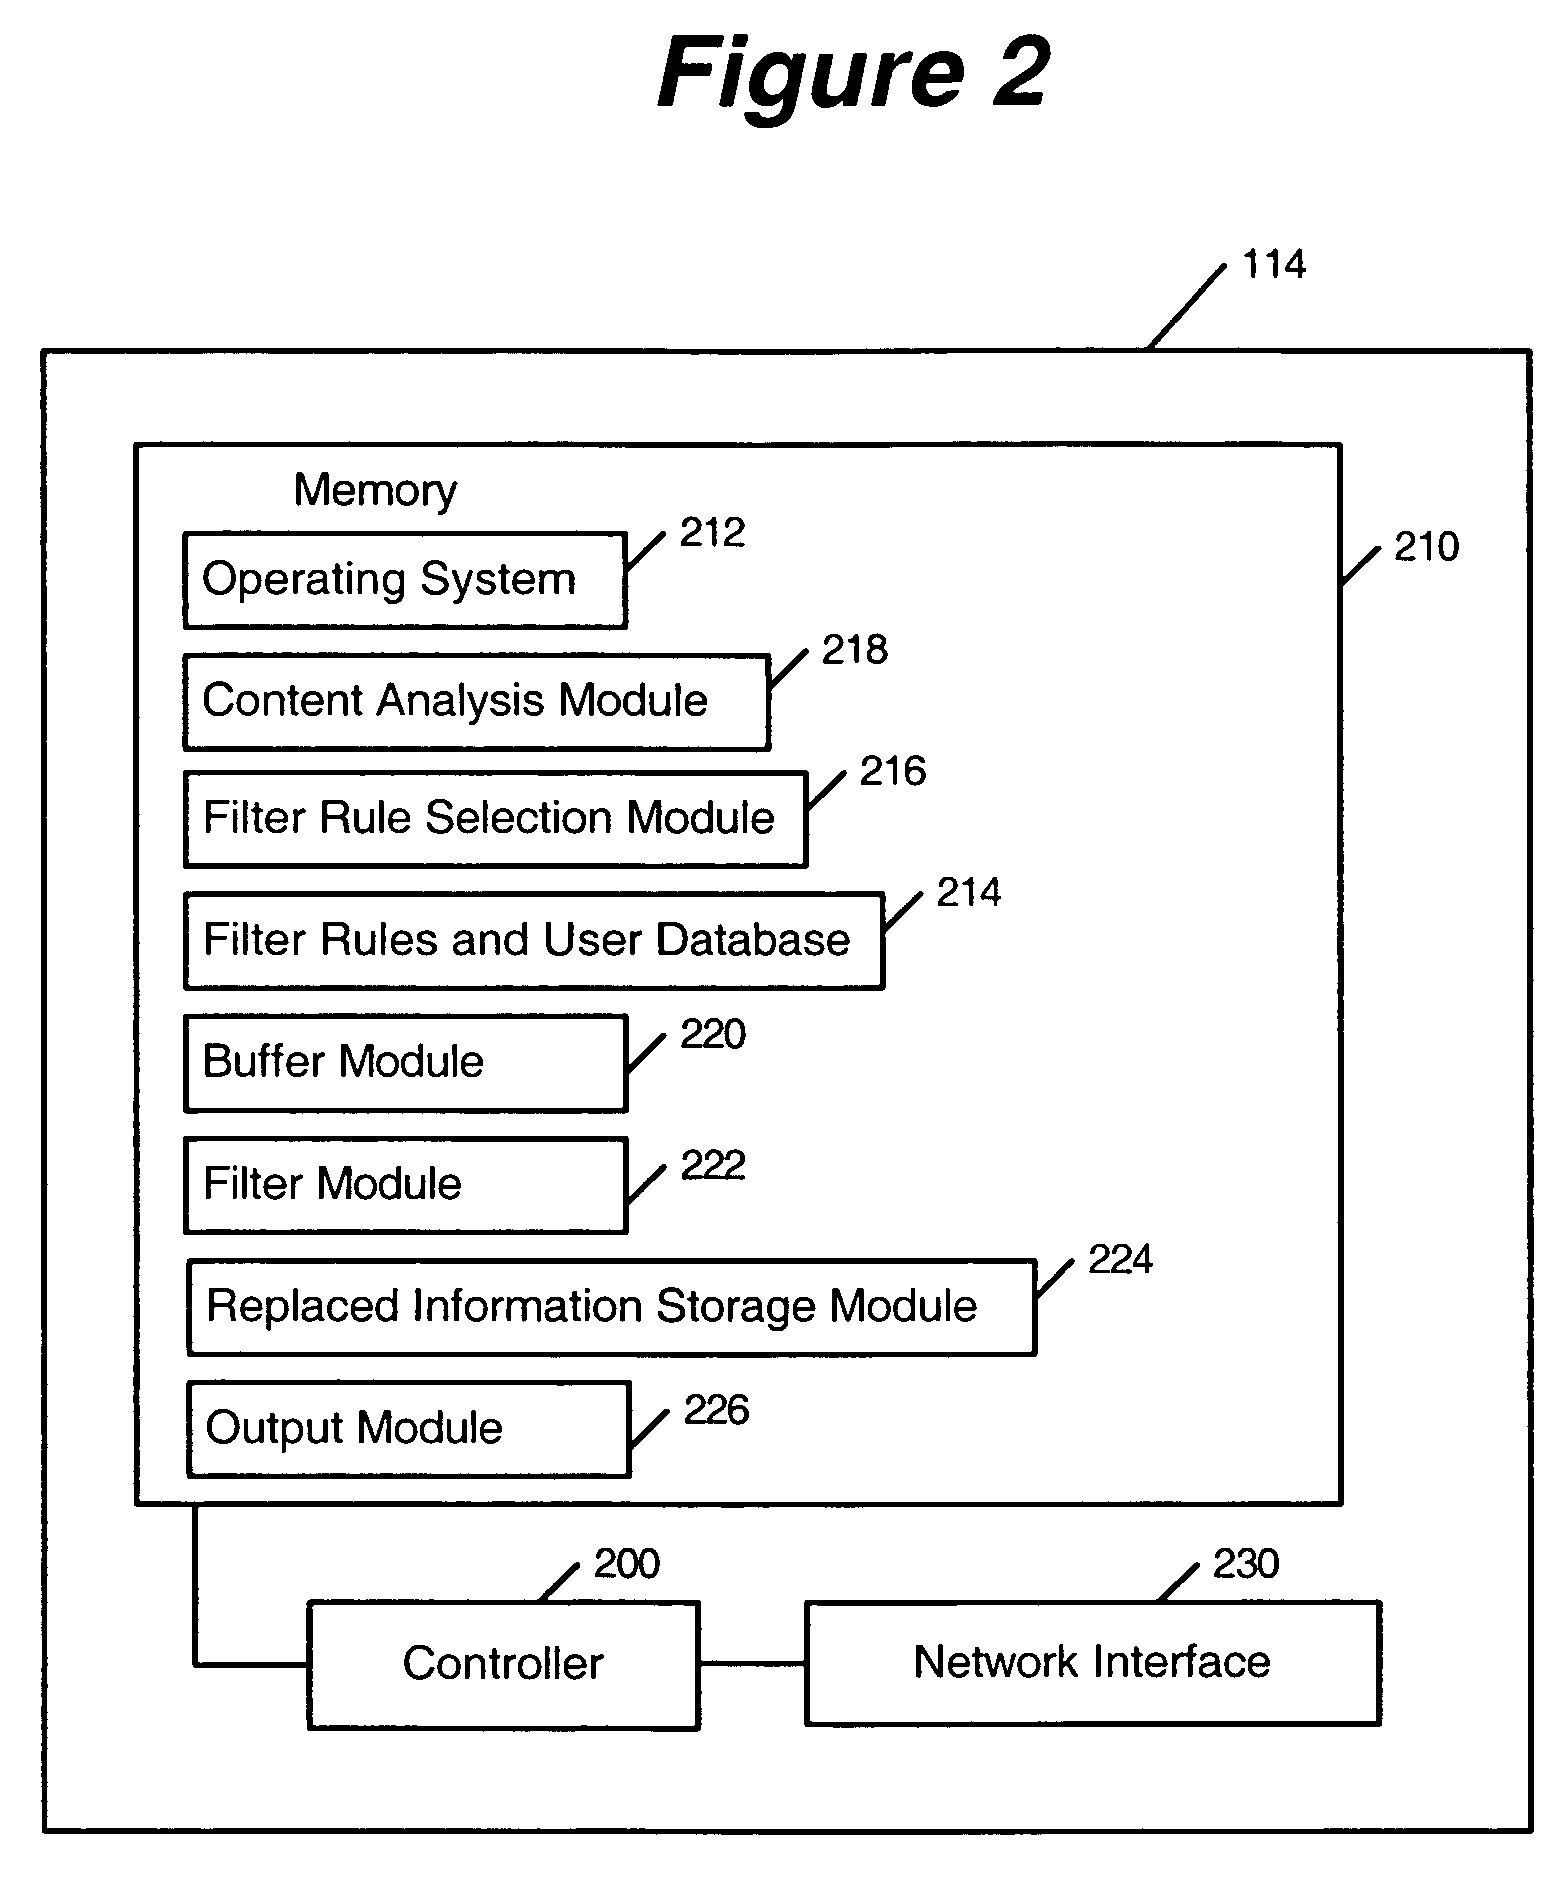 Filtering information at a data network based on filter rules associated with consumer processing devices